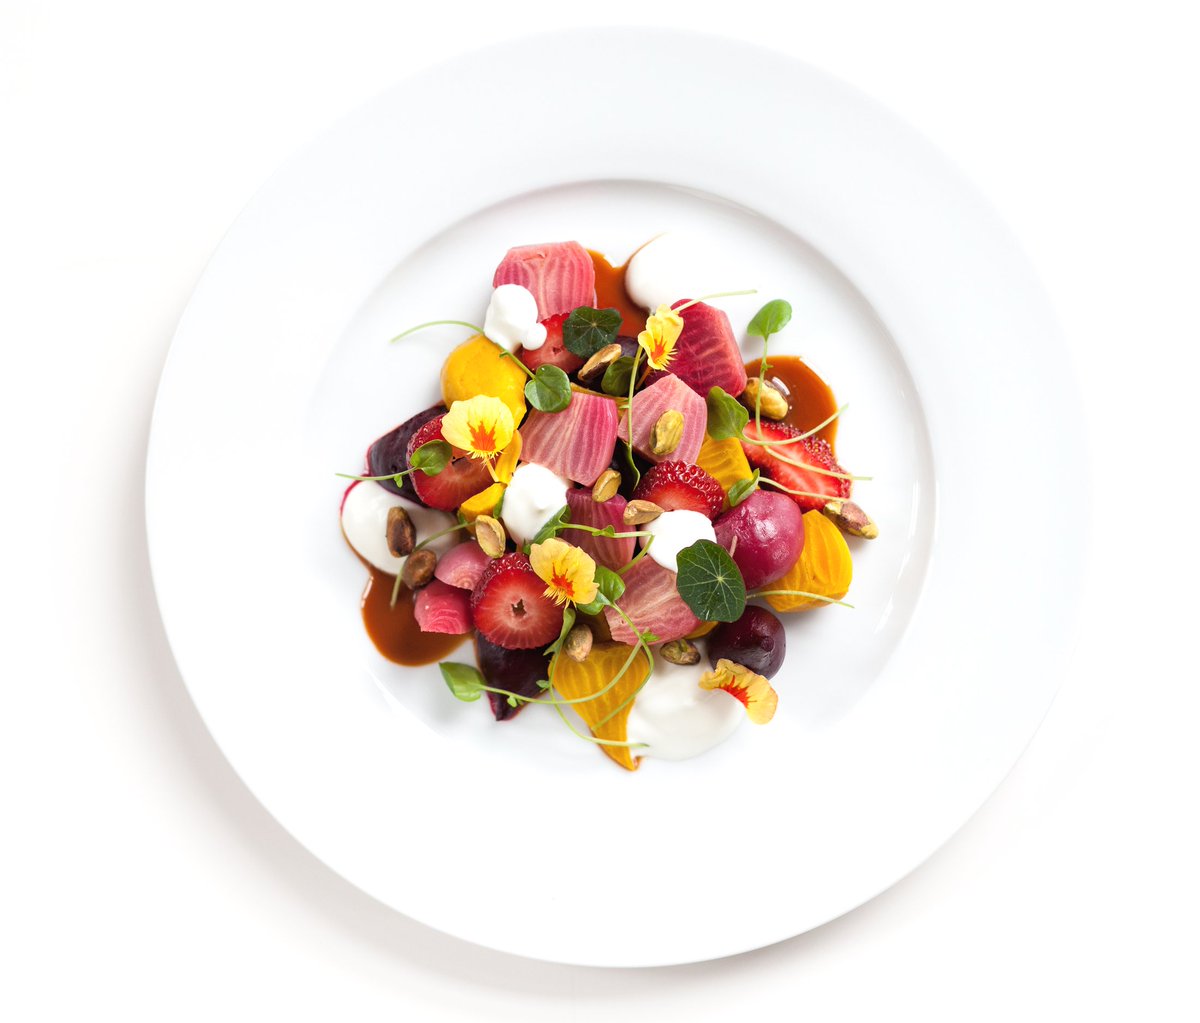 Baby beets that can’t be beat! 🌱 Enjoy a taste of Summer from our onsite caterer @ParamountEvents. ☀️ The perfect pair for you next event at #TheLakewood: bit.ly/2Ss4aVy.🍽️